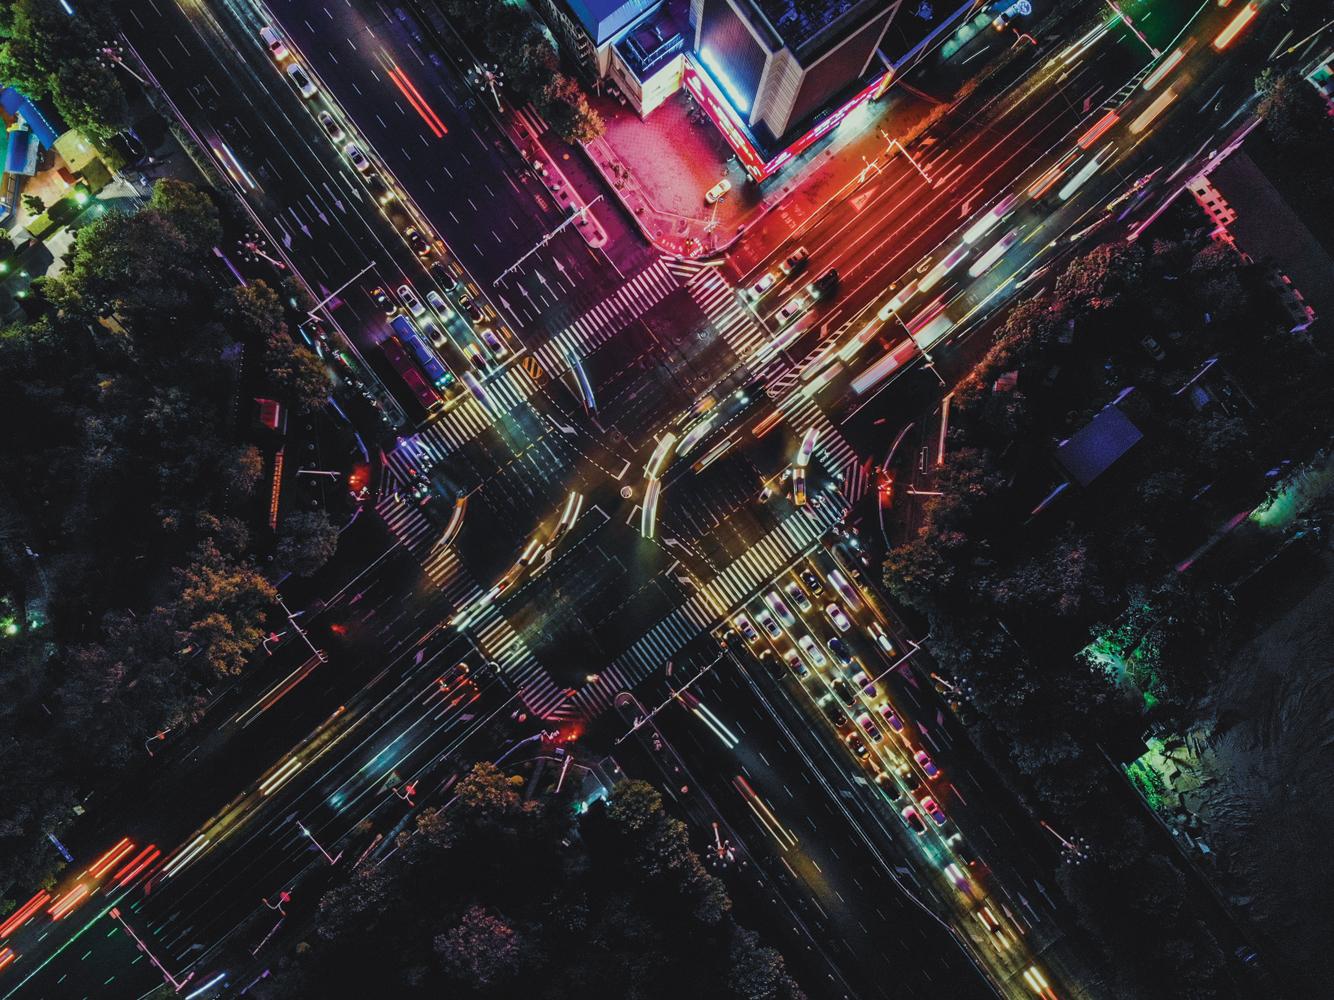 Bird's eye view on busy city intersection at night